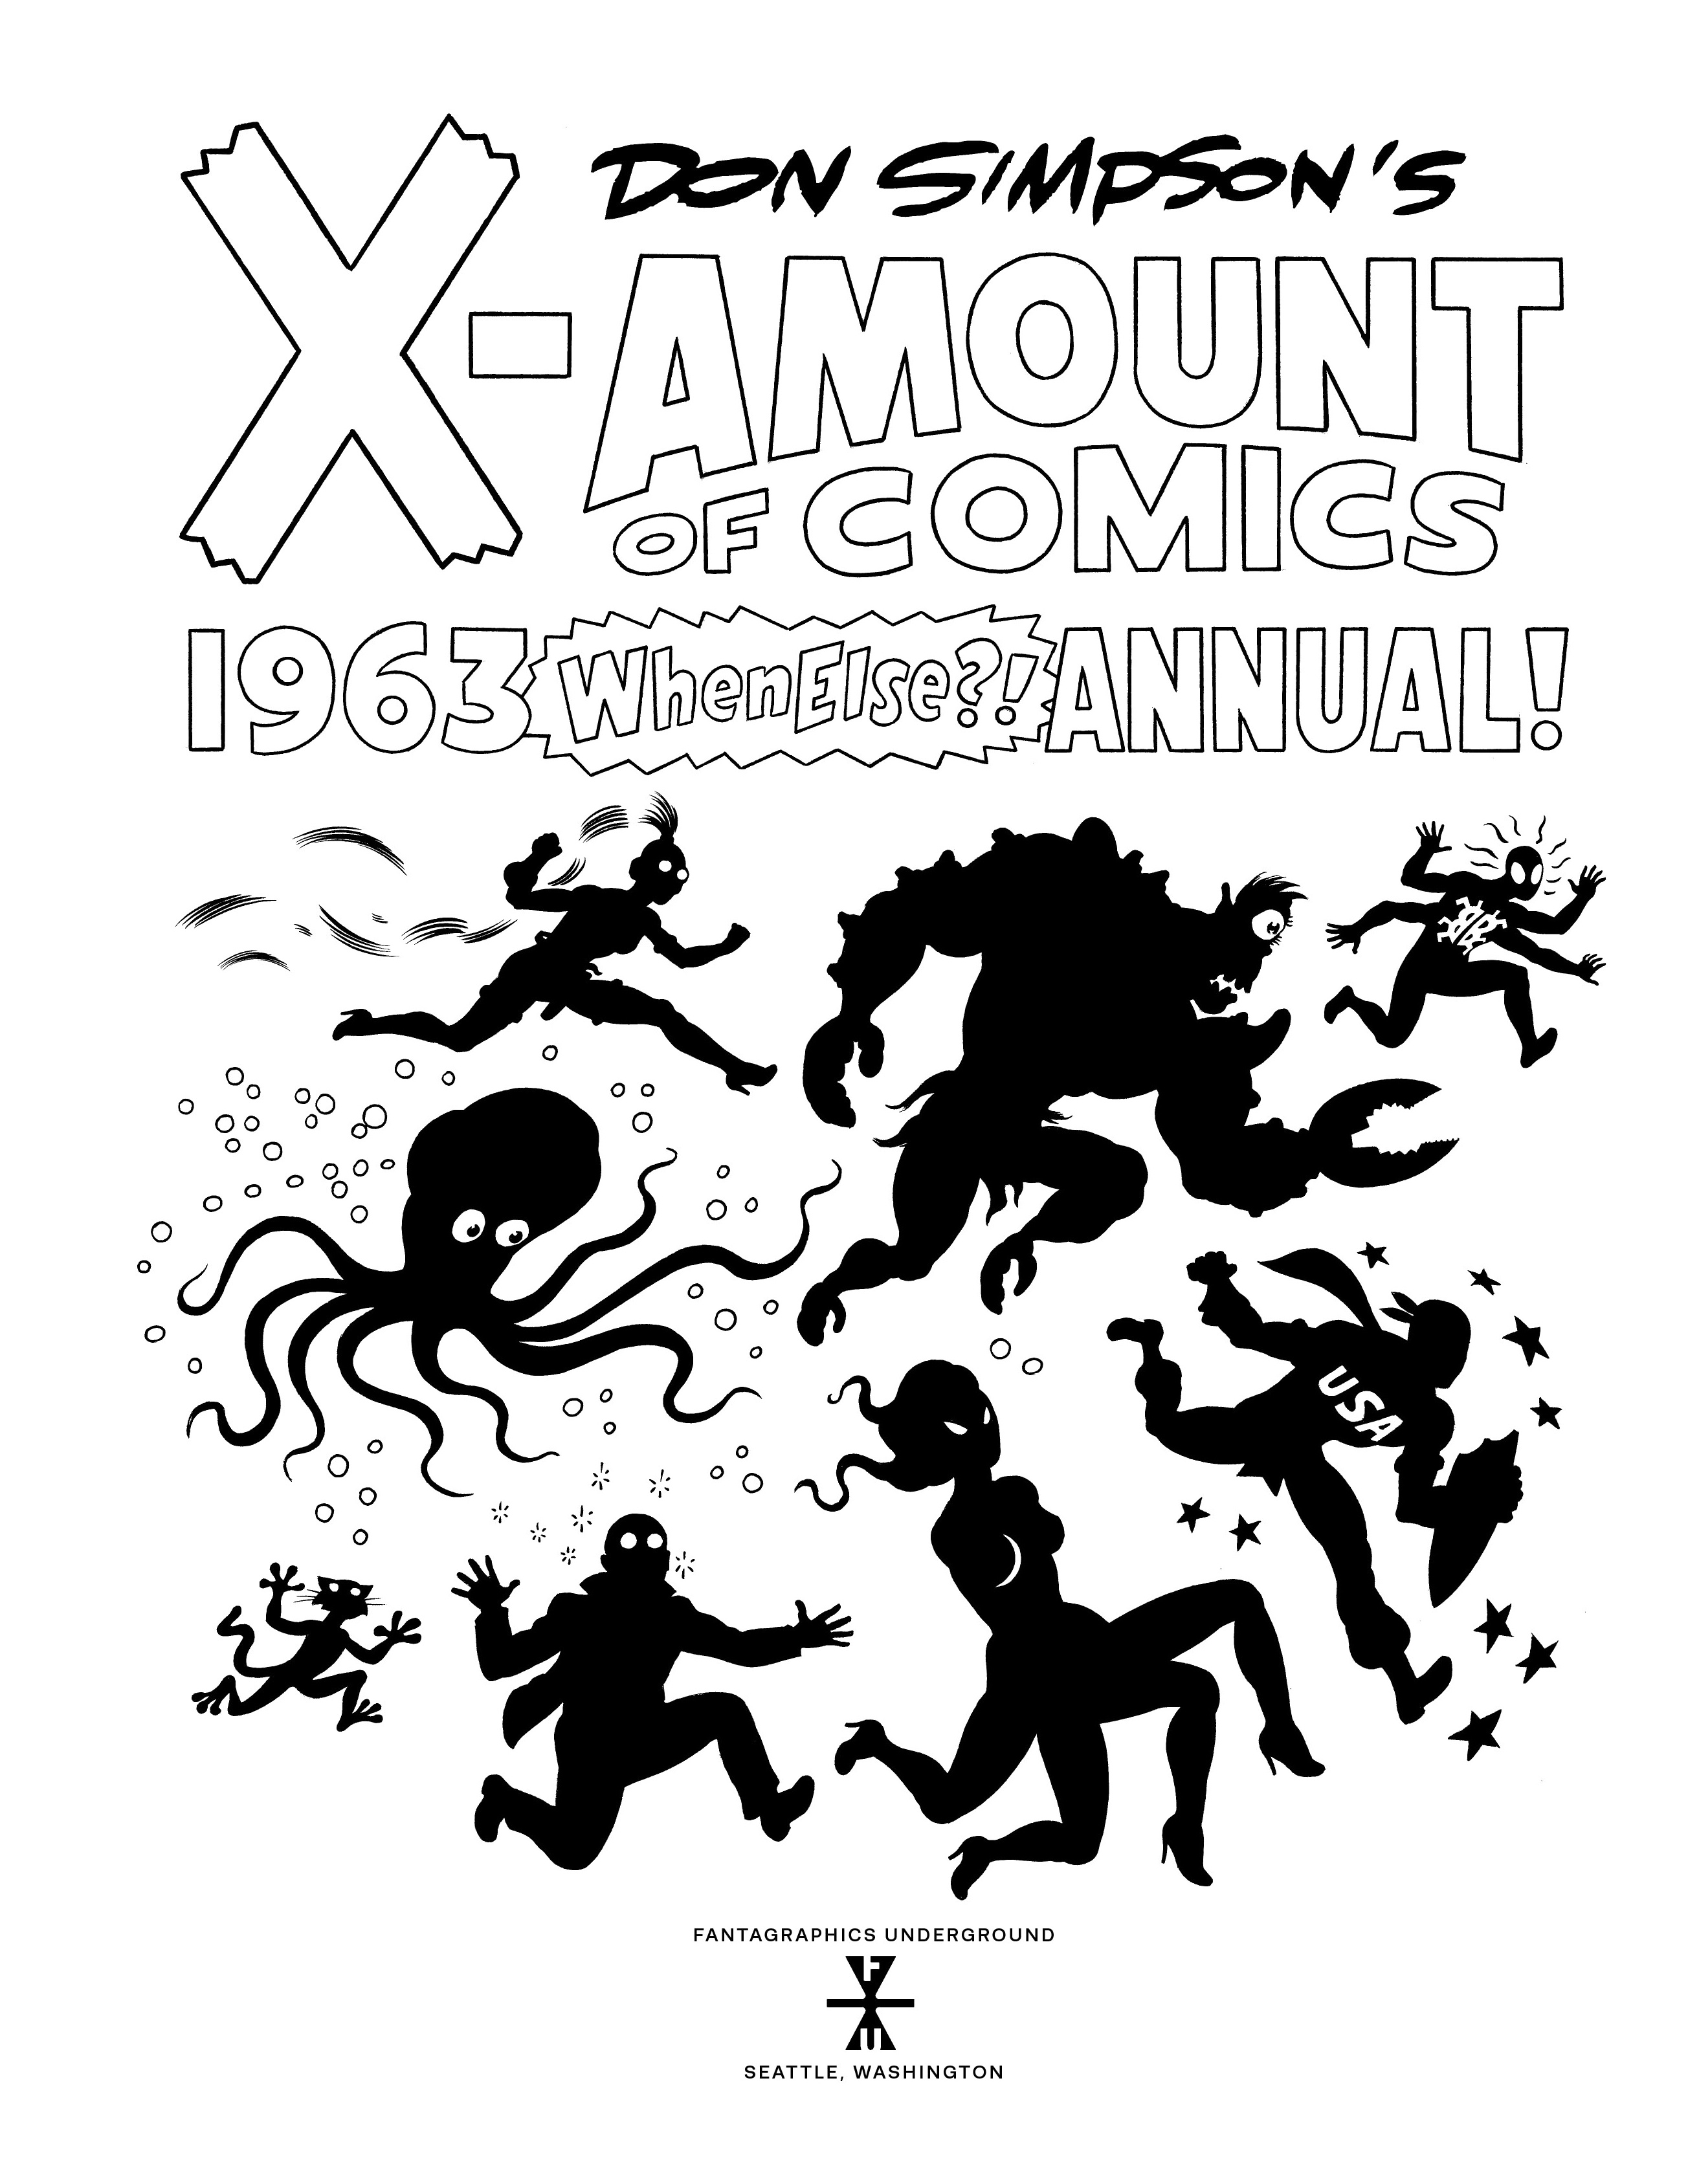 Read online X-Amount of Comics: 1963 (WhenElse) Annual comic -  Issue # TPB - 2